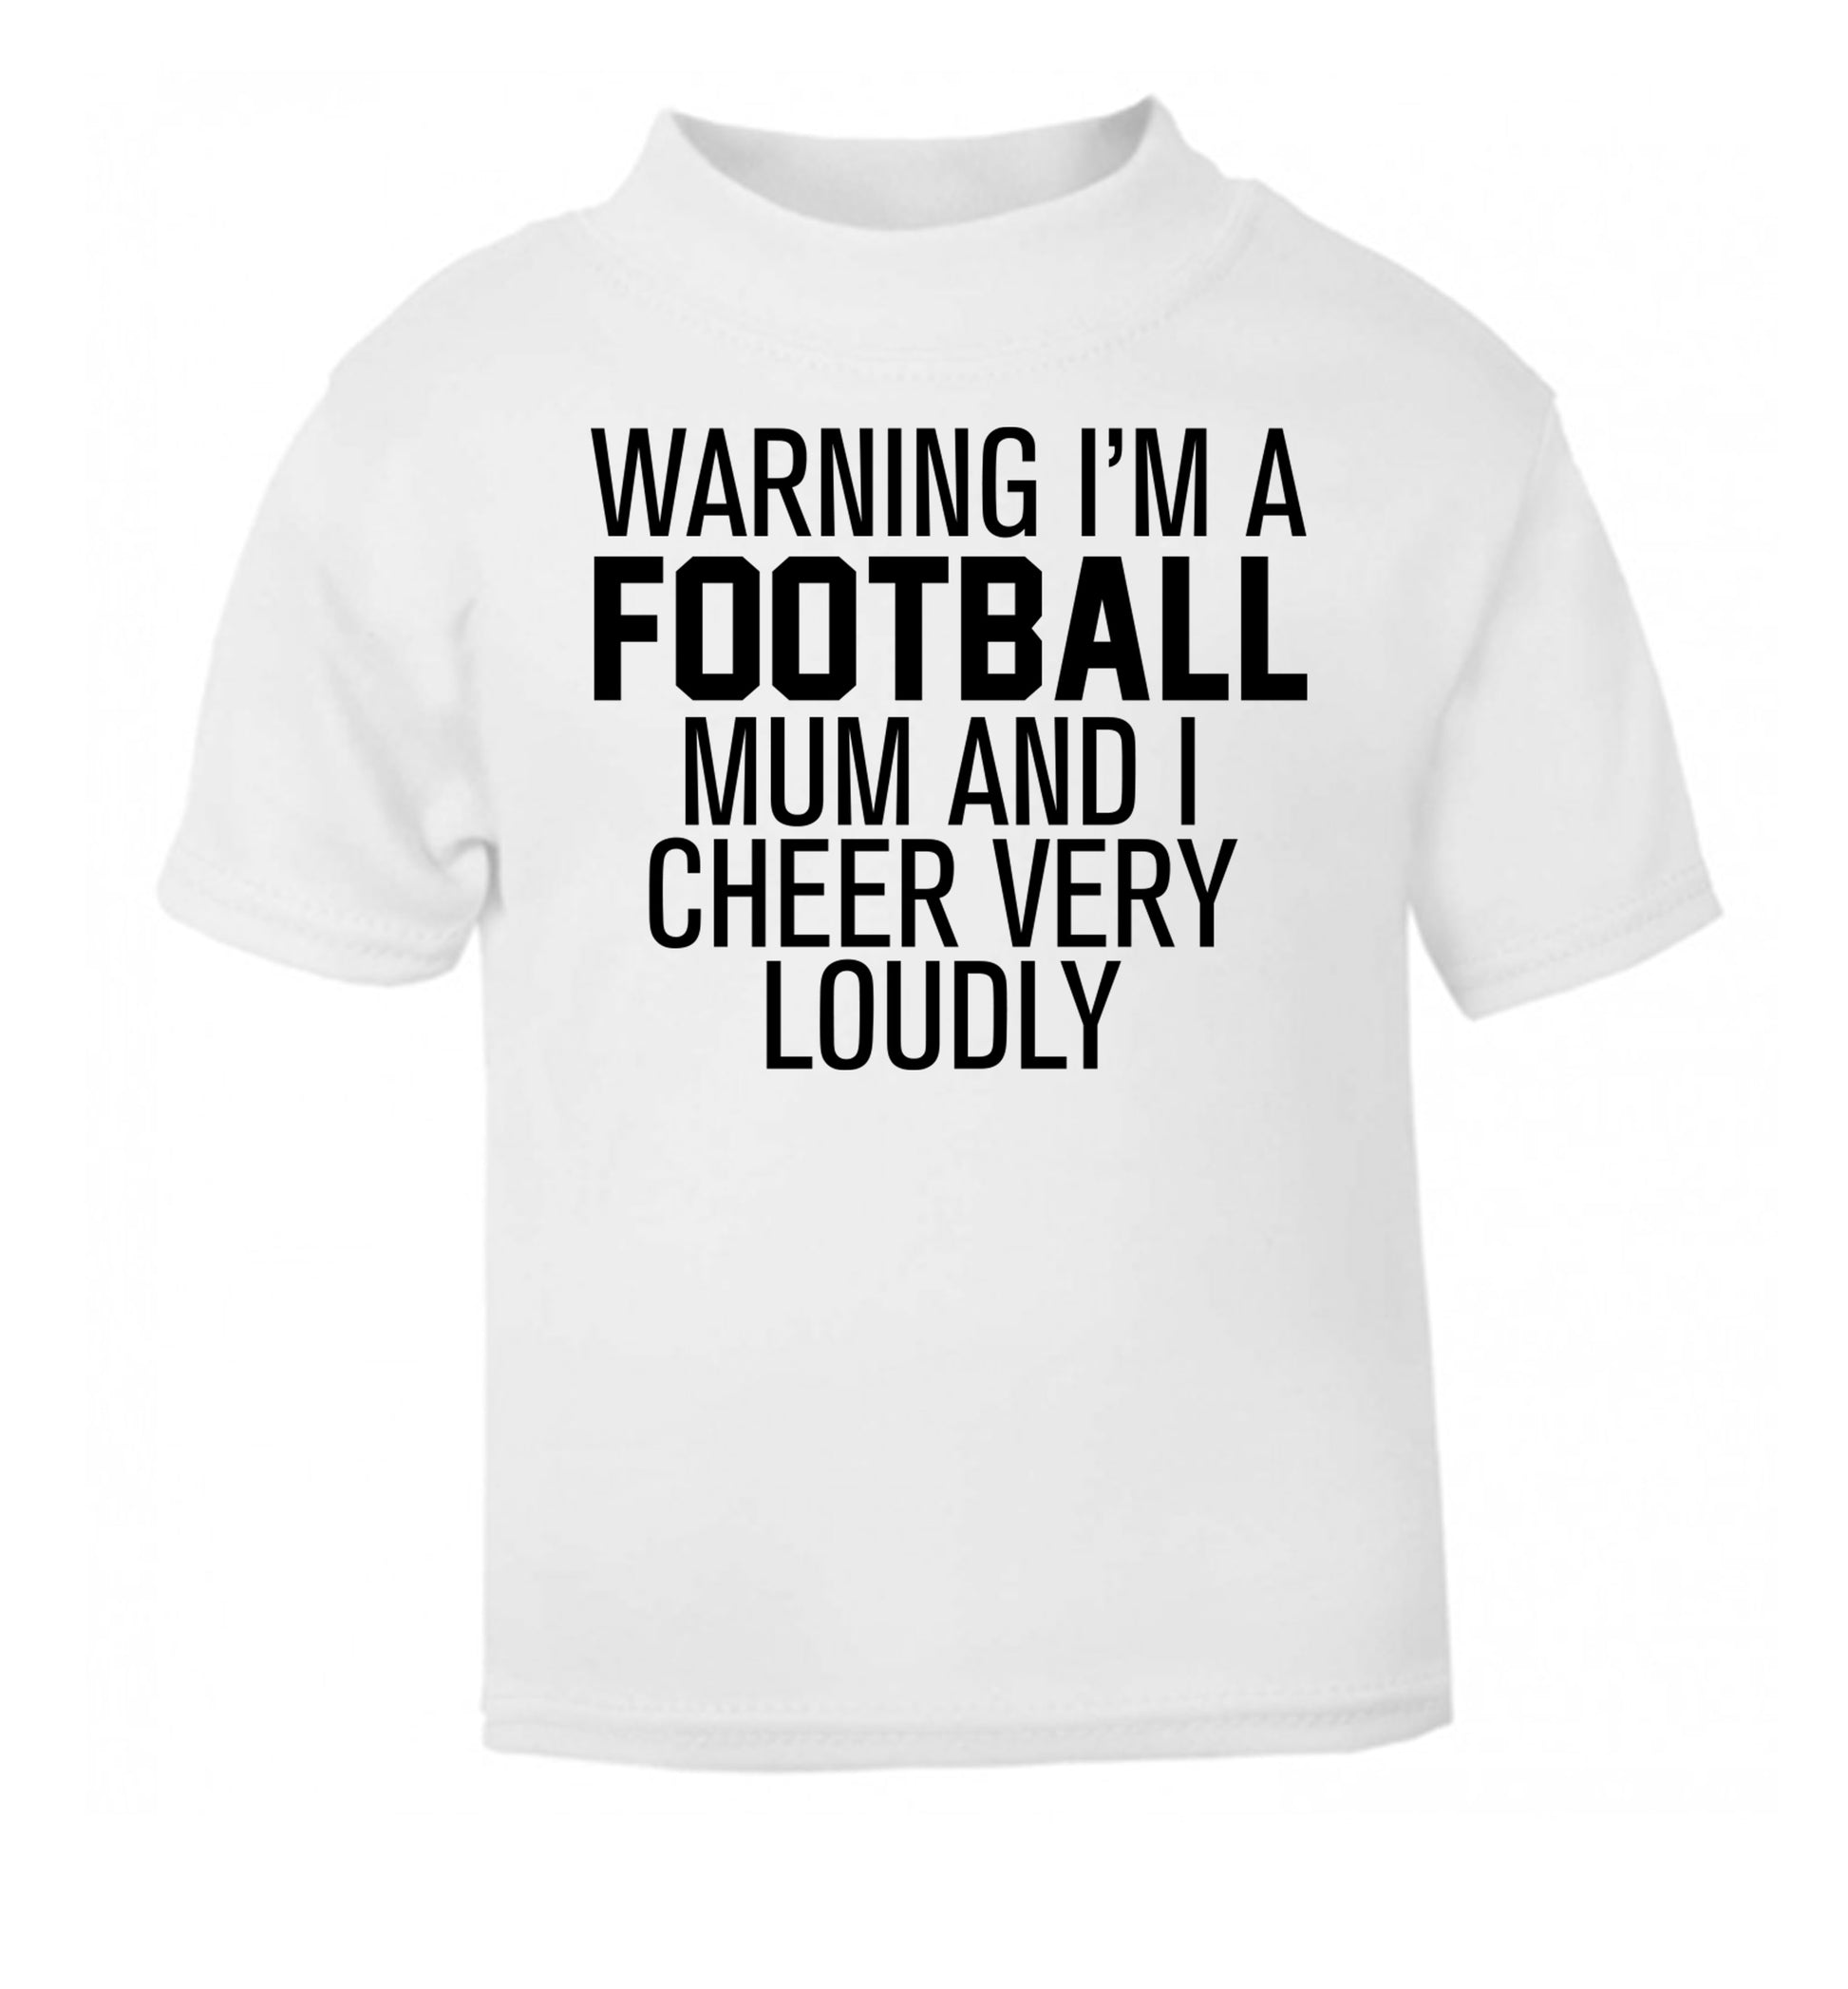 Warning I'm a football mum and I cheer very loudly white Baby Toddler Tshirt 2 Years